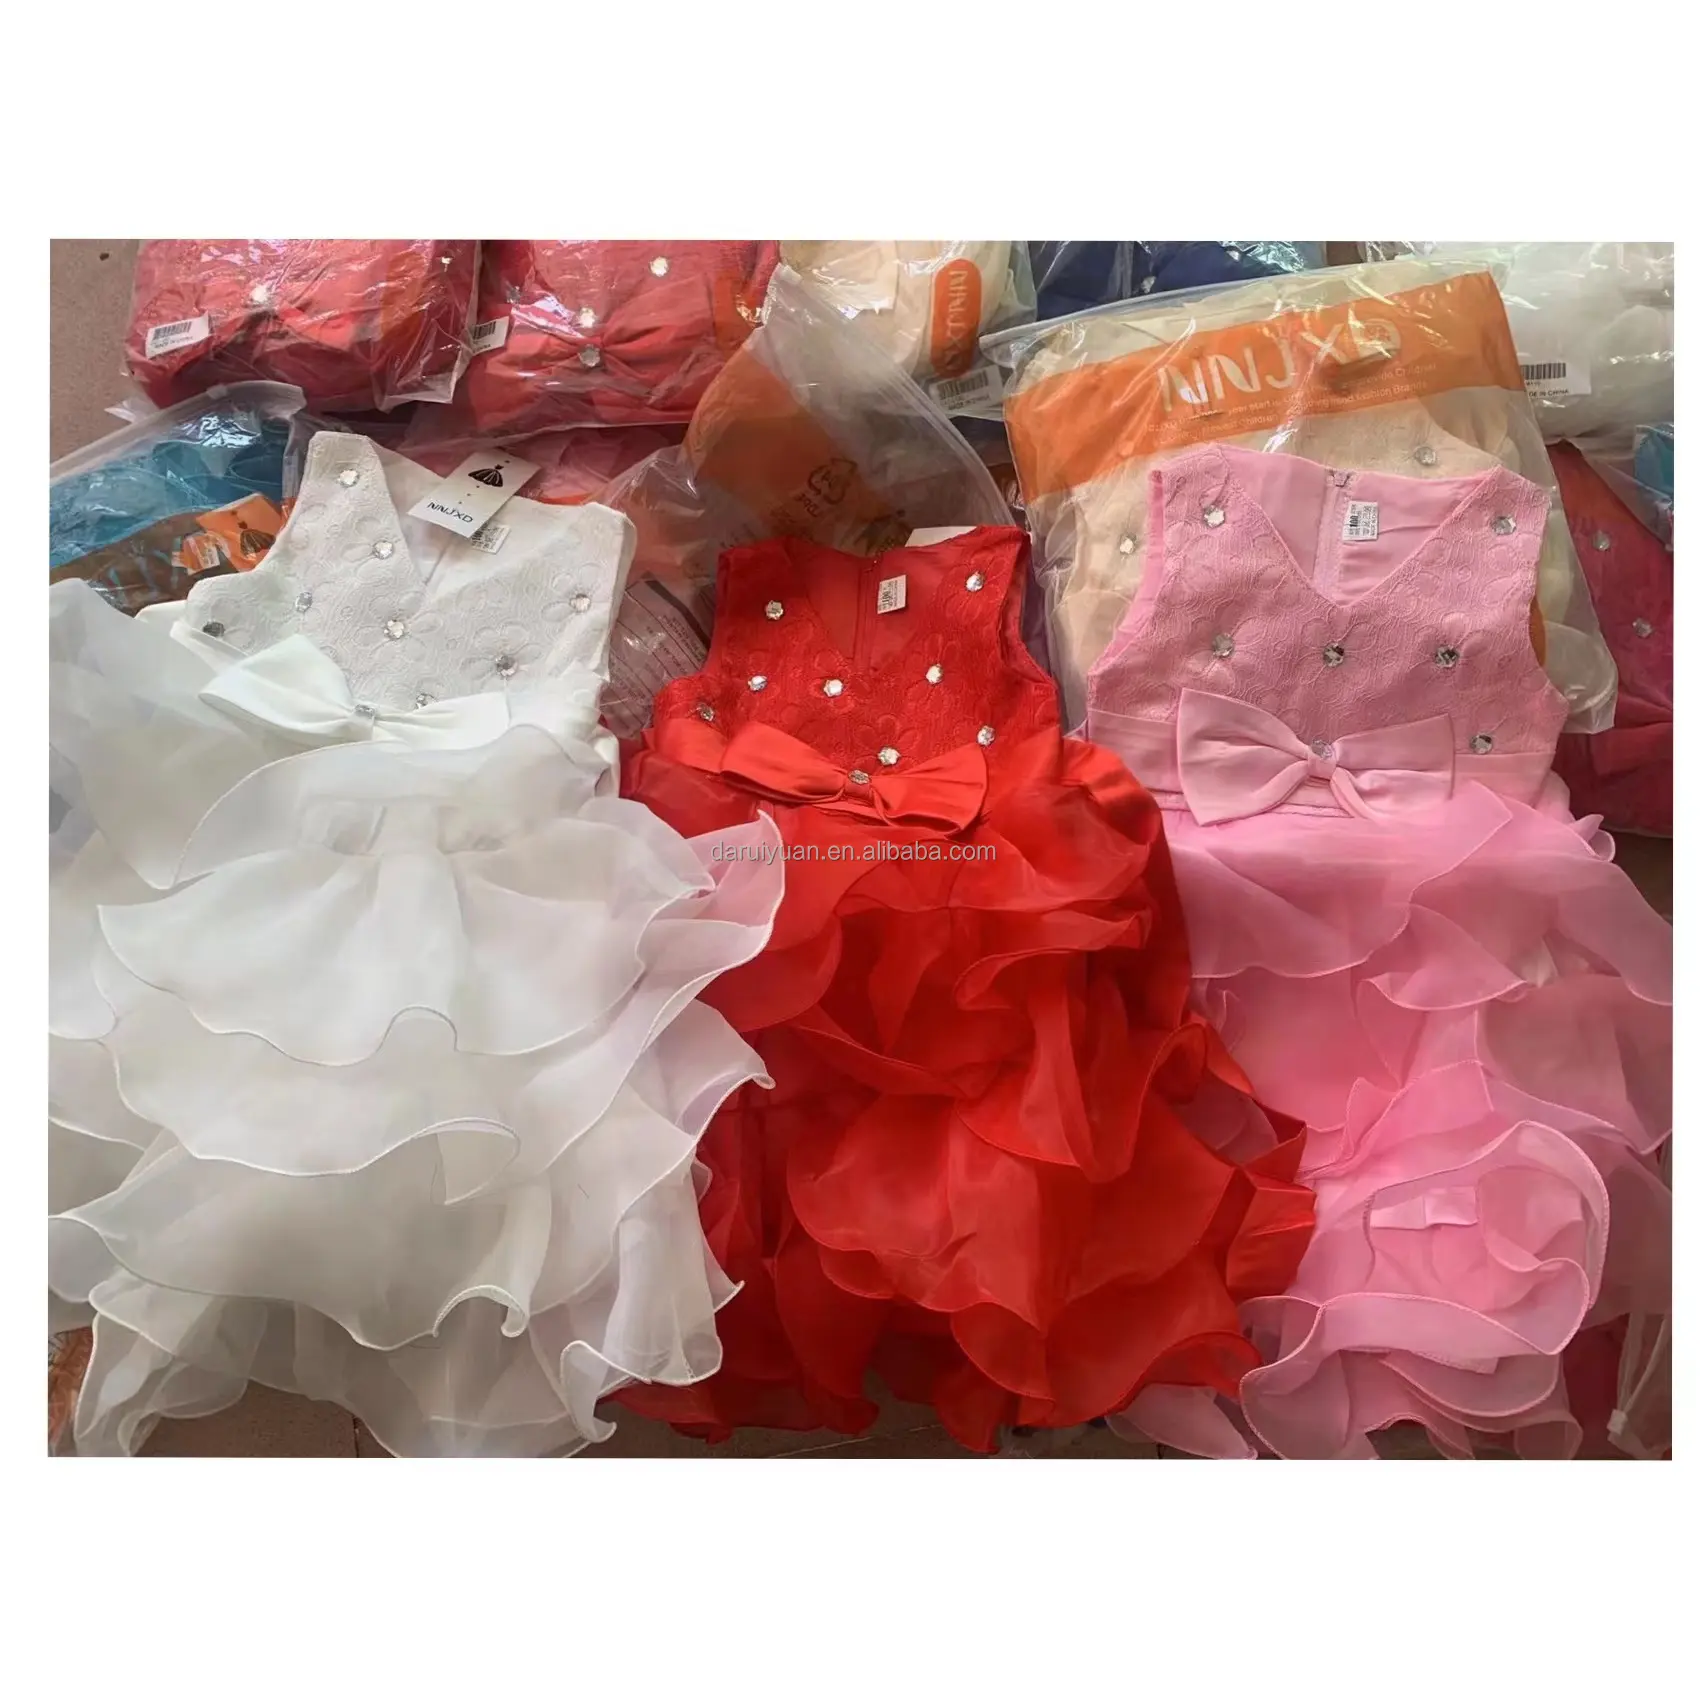 Summer new fashion children Girls dresses Kids lace party princess dress baby clothing Factory selling price